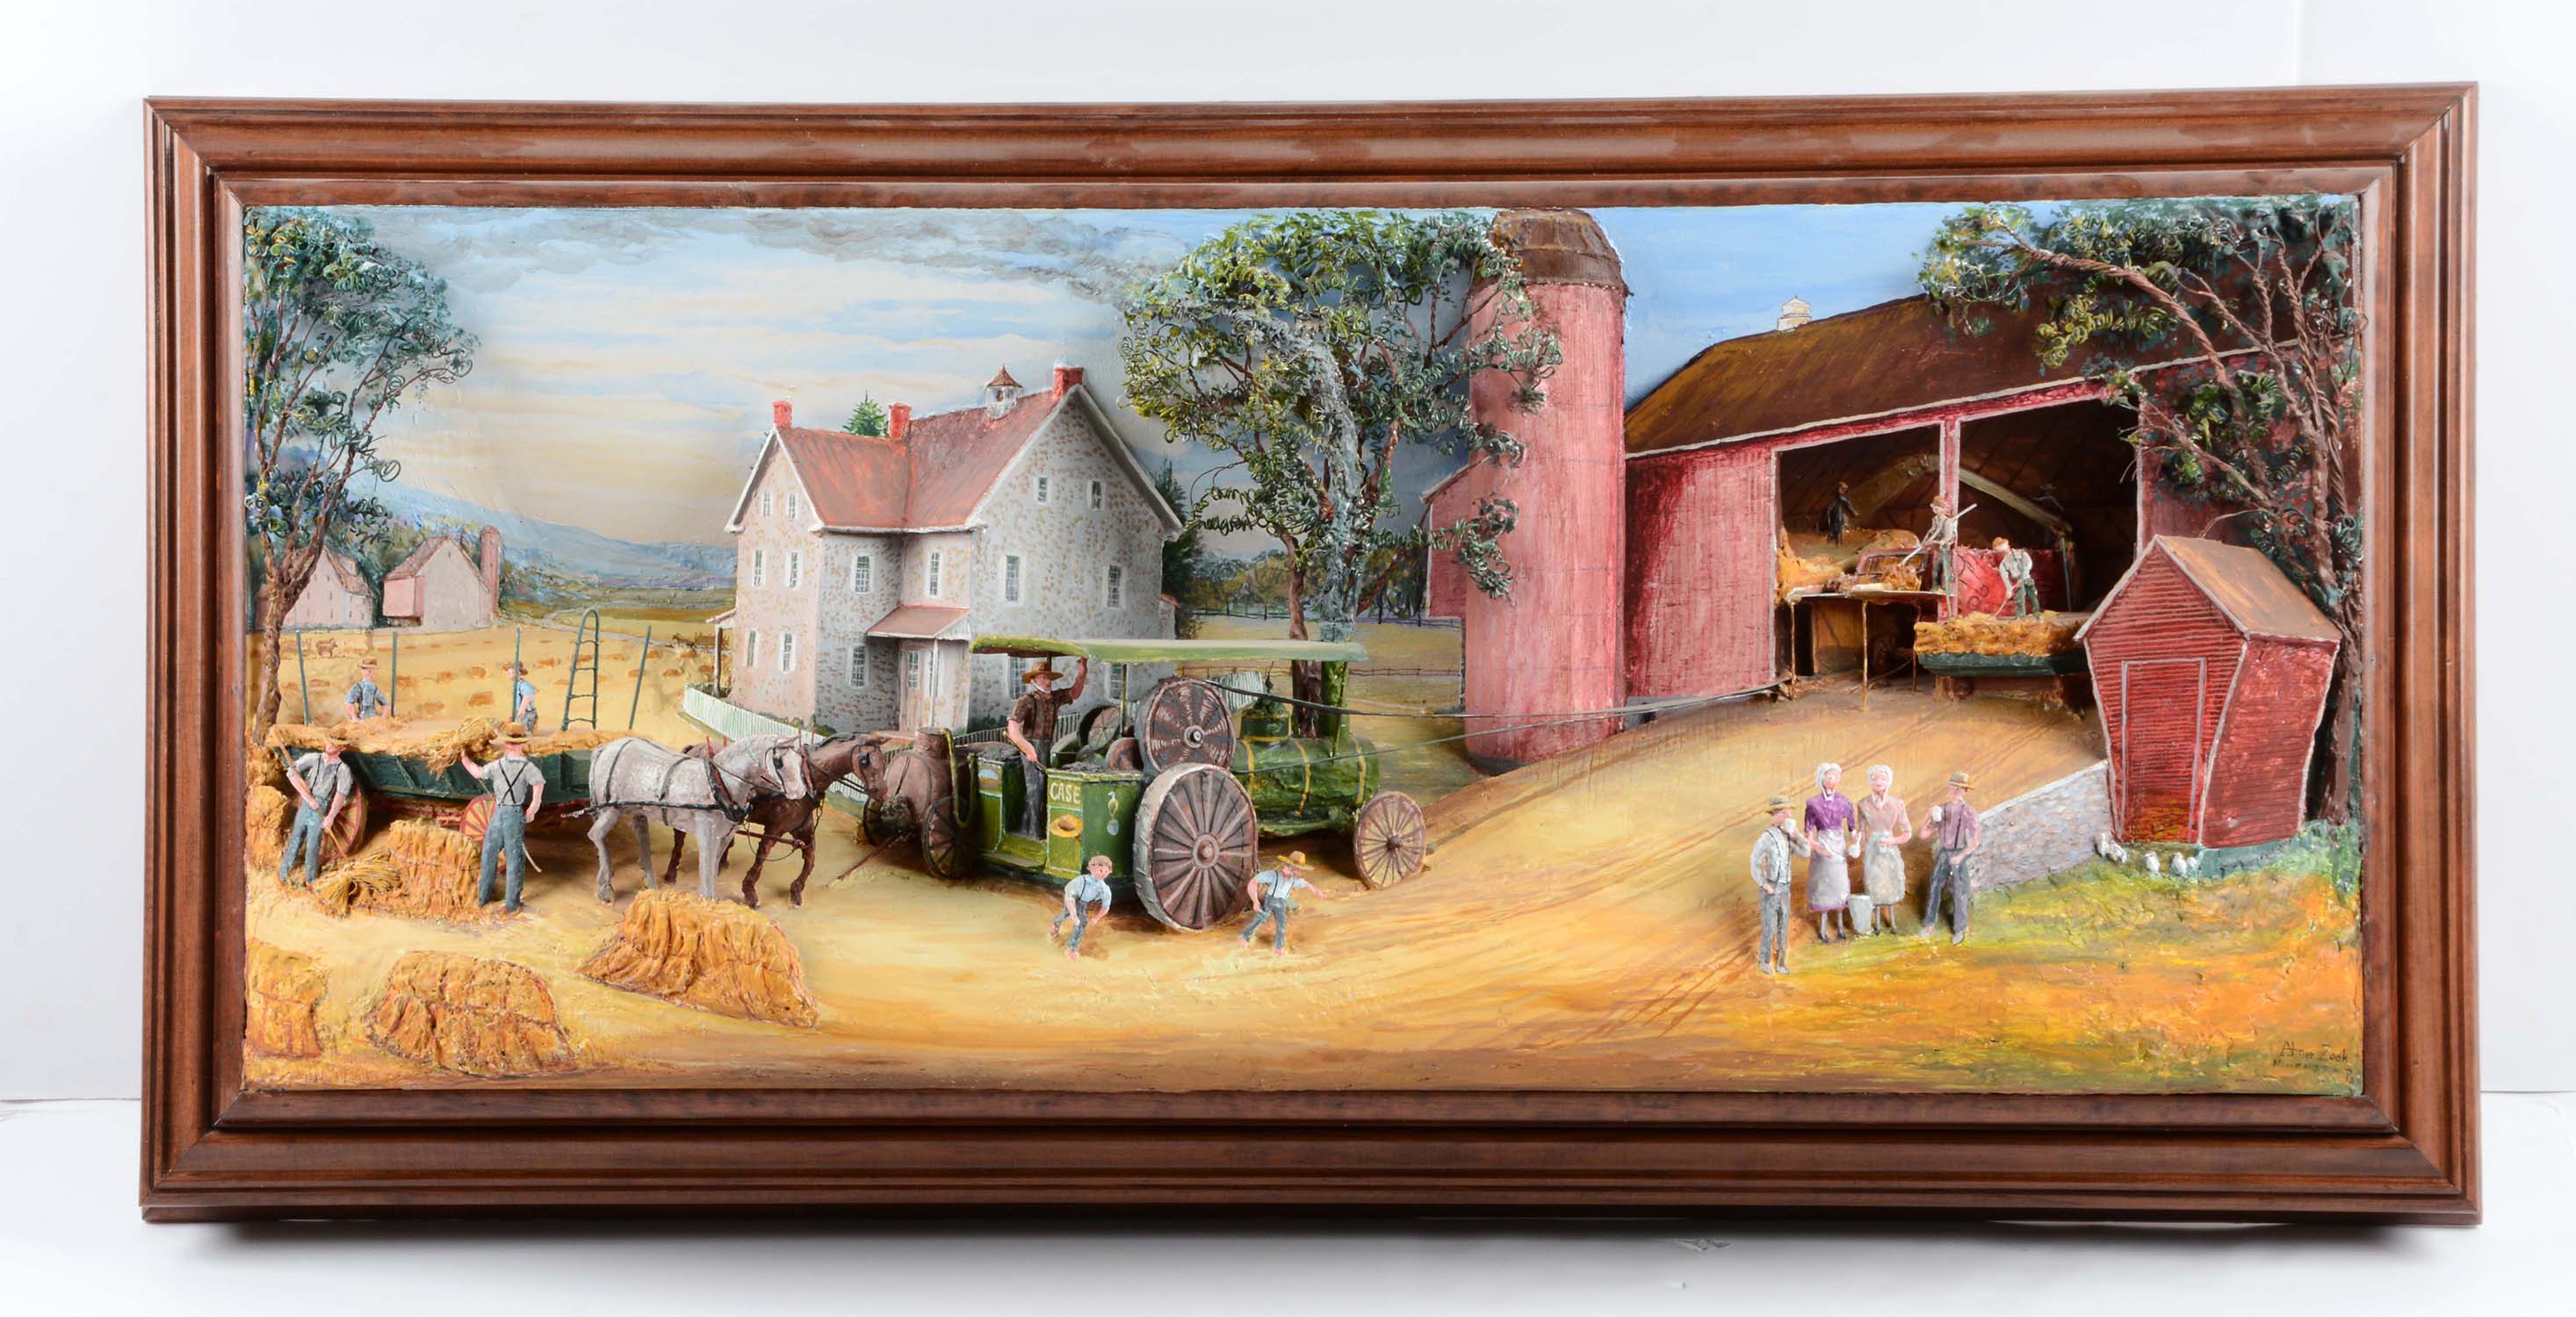 Abner Zook 3D Farm Painting, estimated at $4,000-8,000.